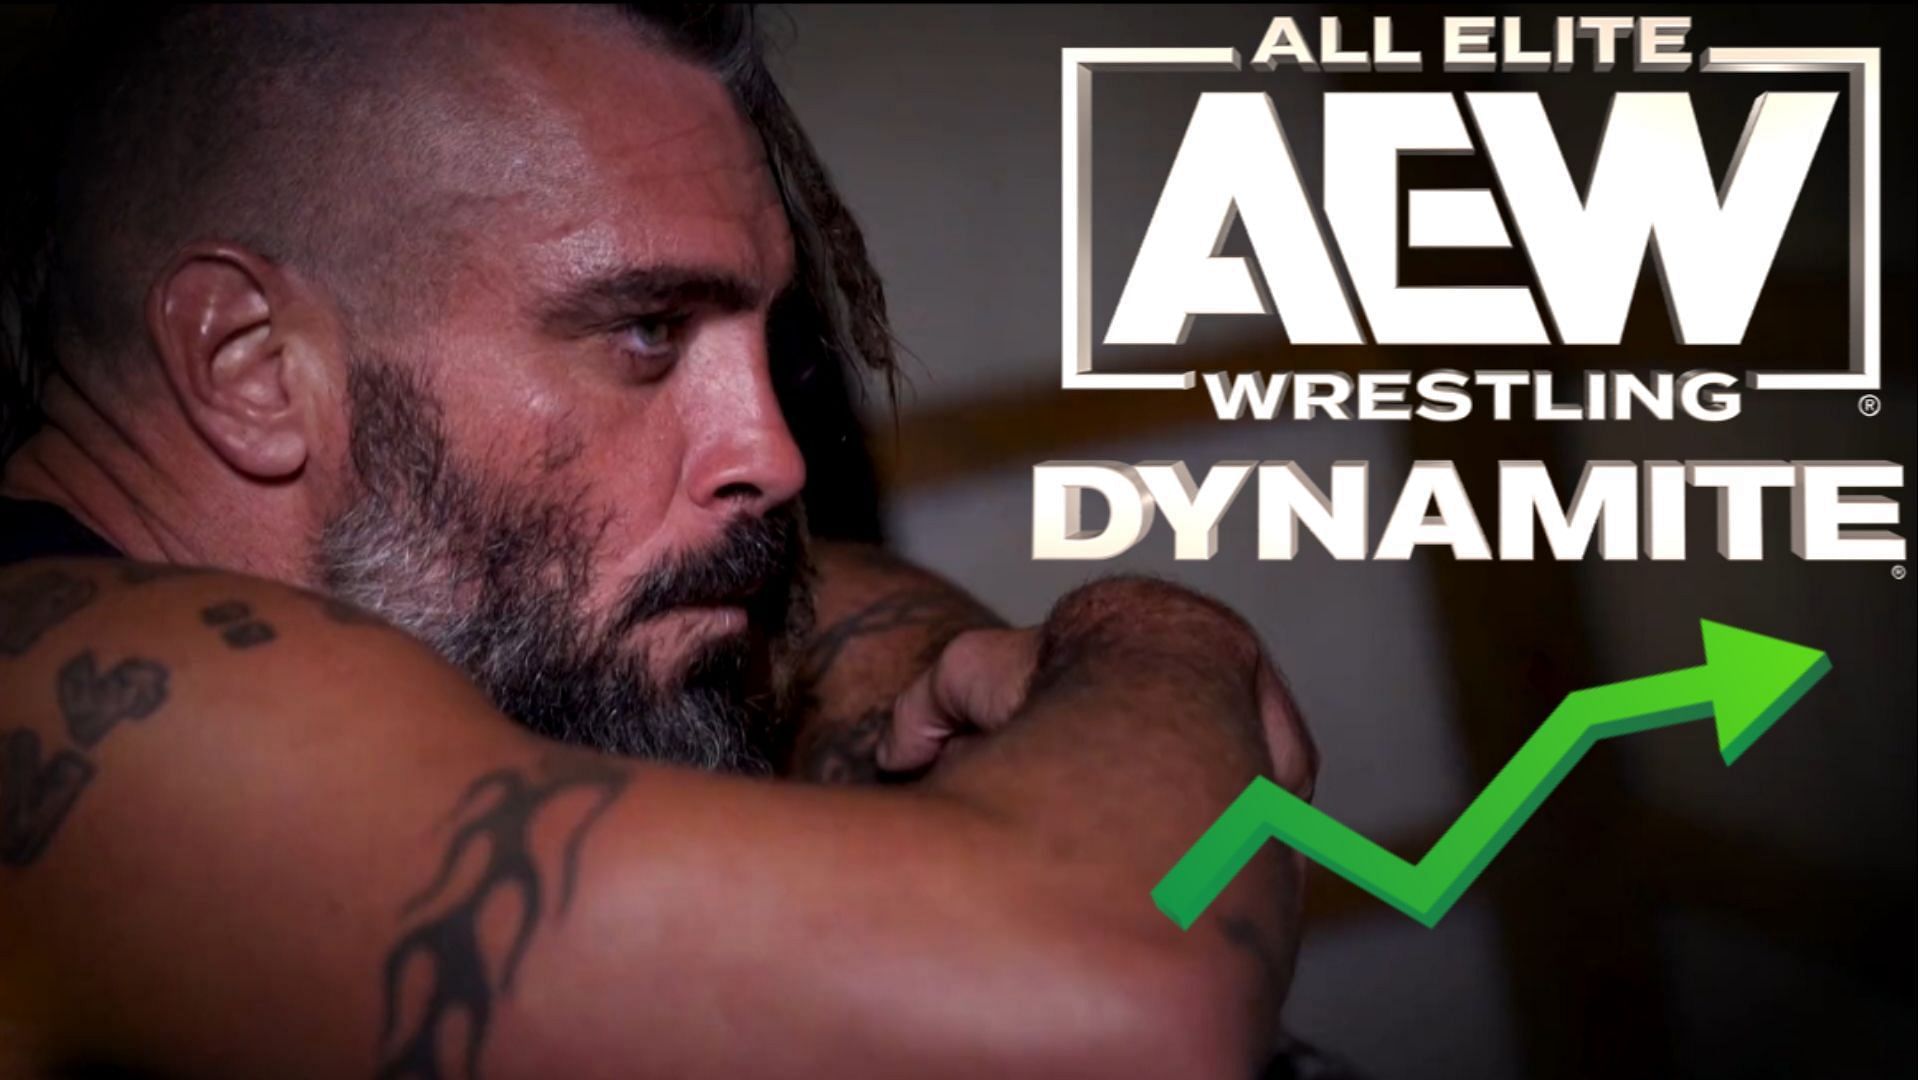 “The streak is over” – AEW fans rejoice as Dynamite finally breaks 1 million barrier with tribute to Jay Briscoe’s passing